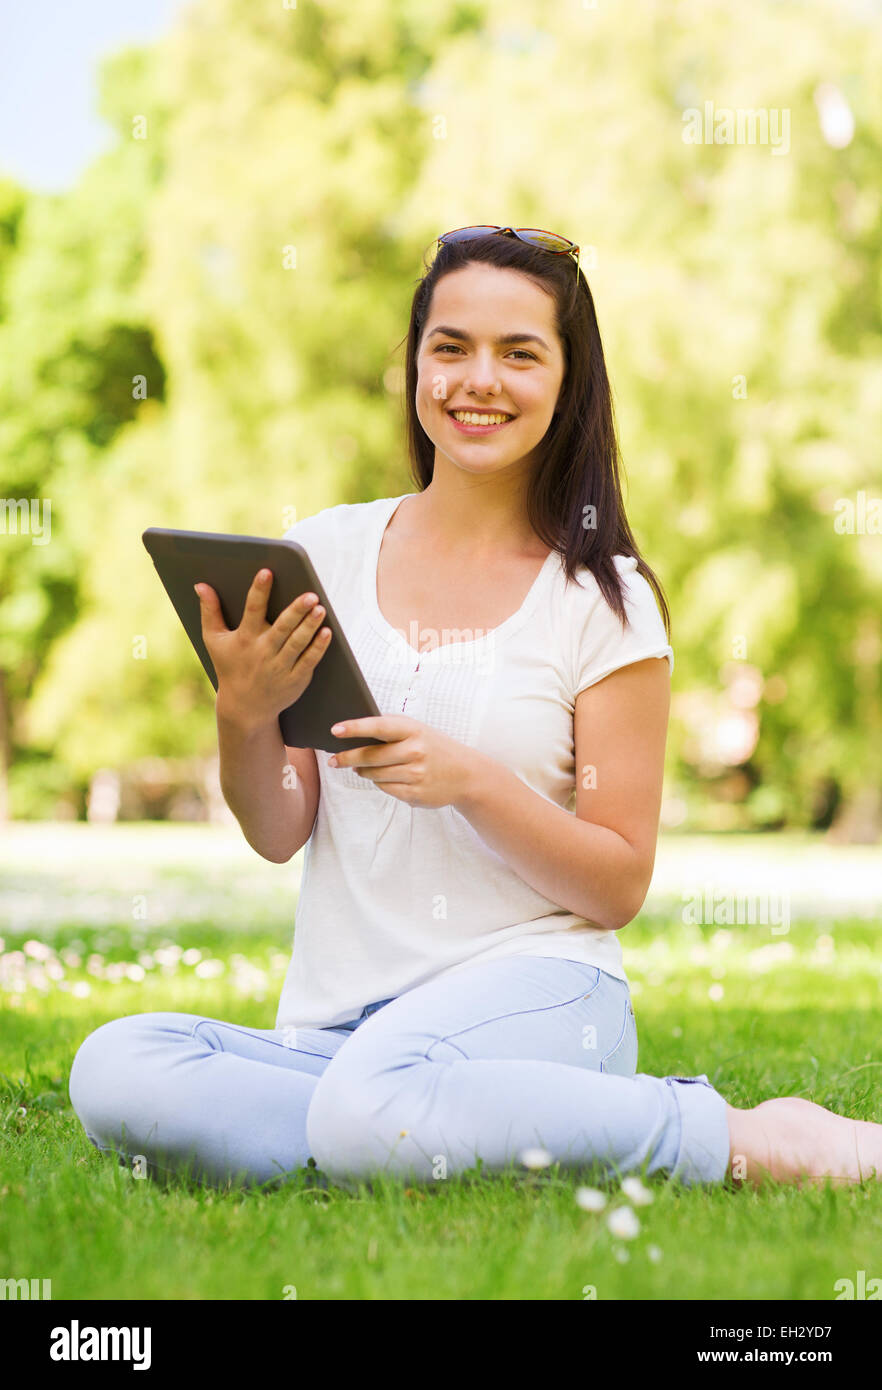 Smiling young girl with tablet pc sitting on grass Banque D'Images